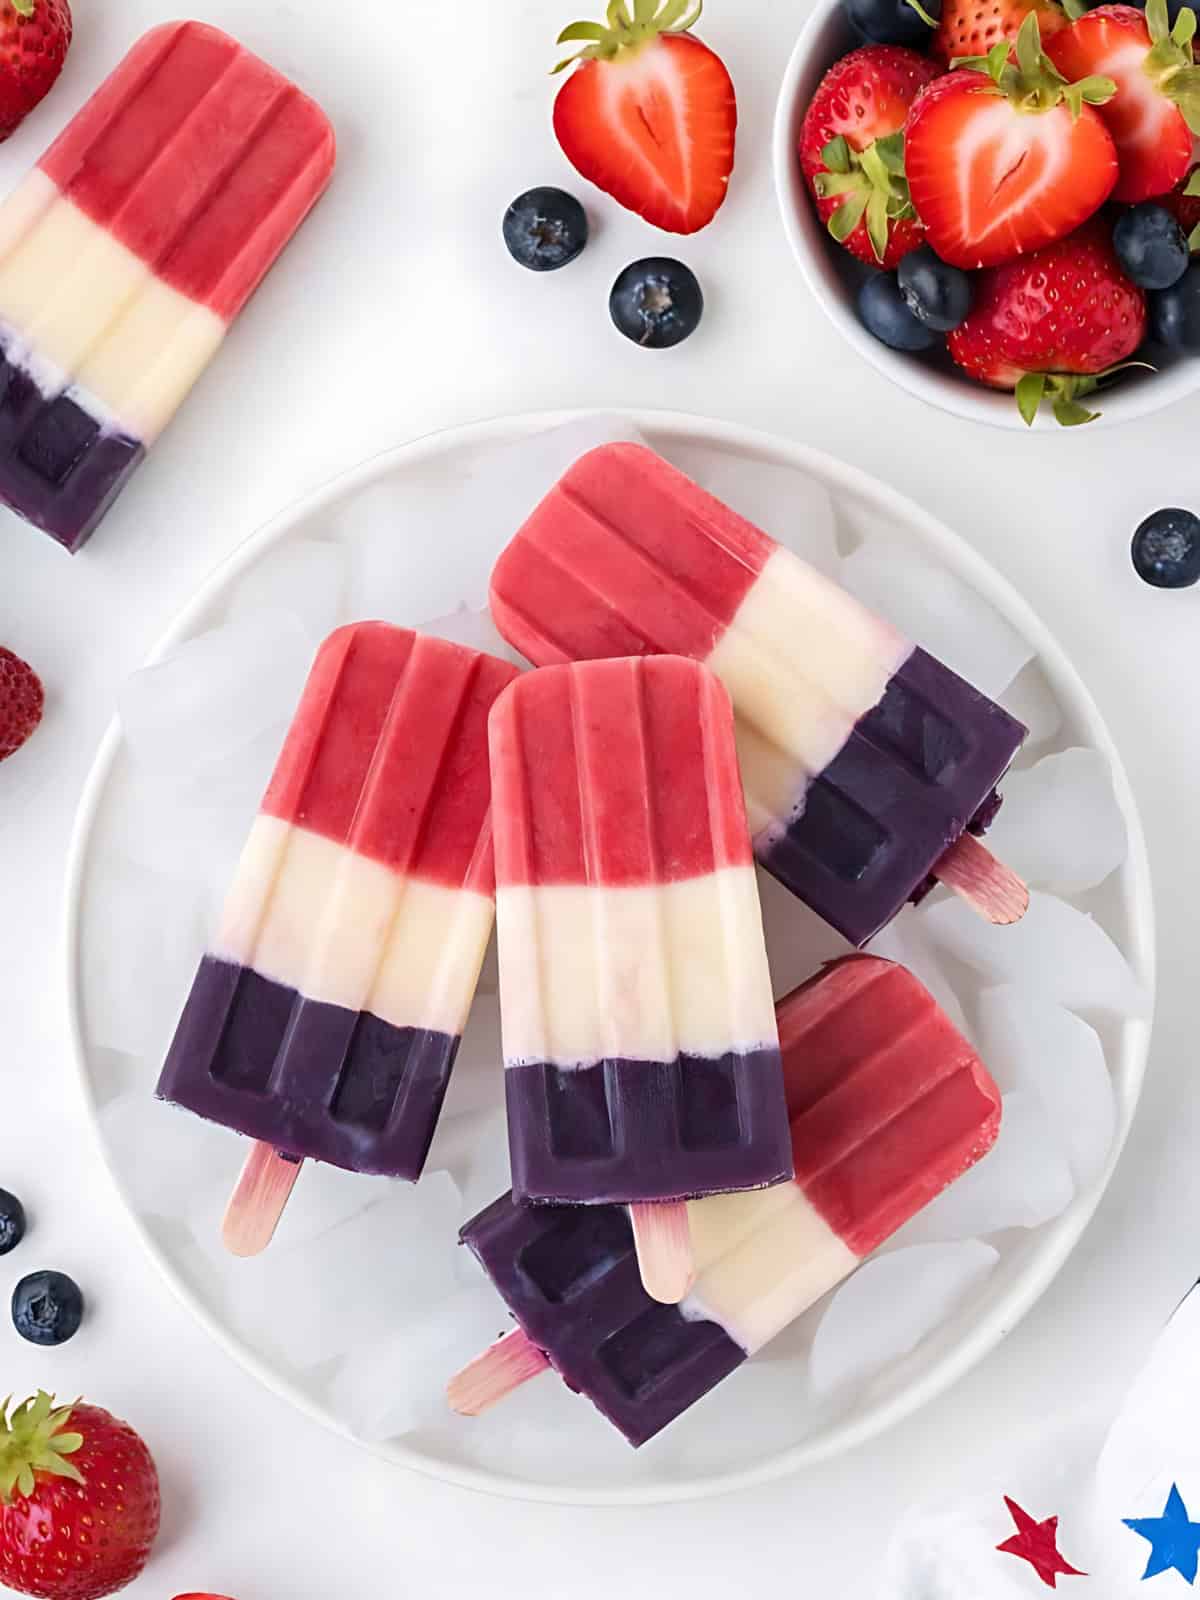 red white and blue popsicles resting on ice cubes.